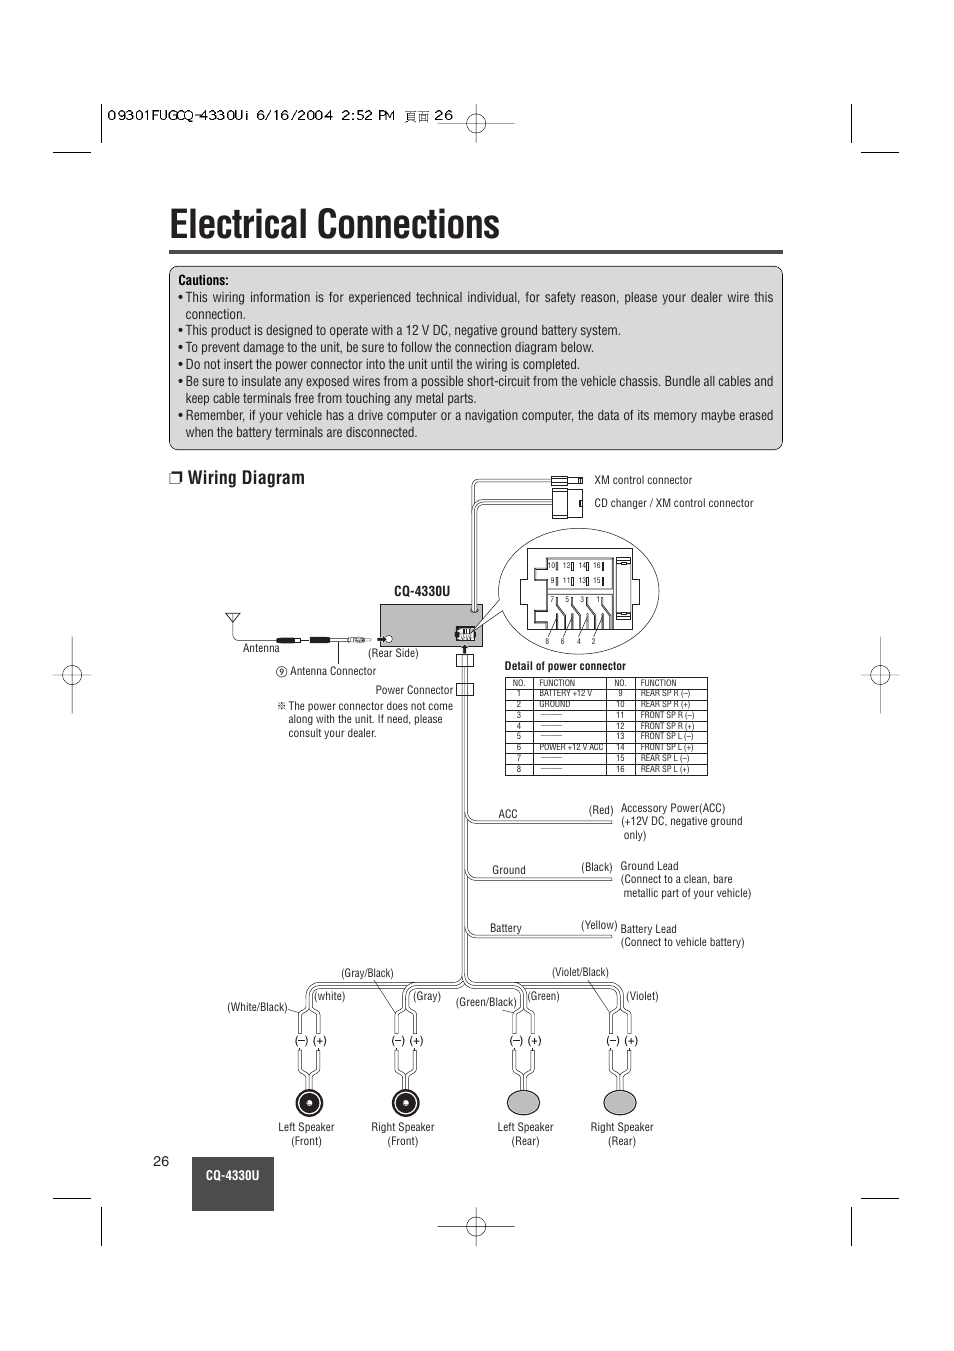 Electrical connections, Wiring diagram | Panasonic CQ-4330U User Manual | Page 26 / 30